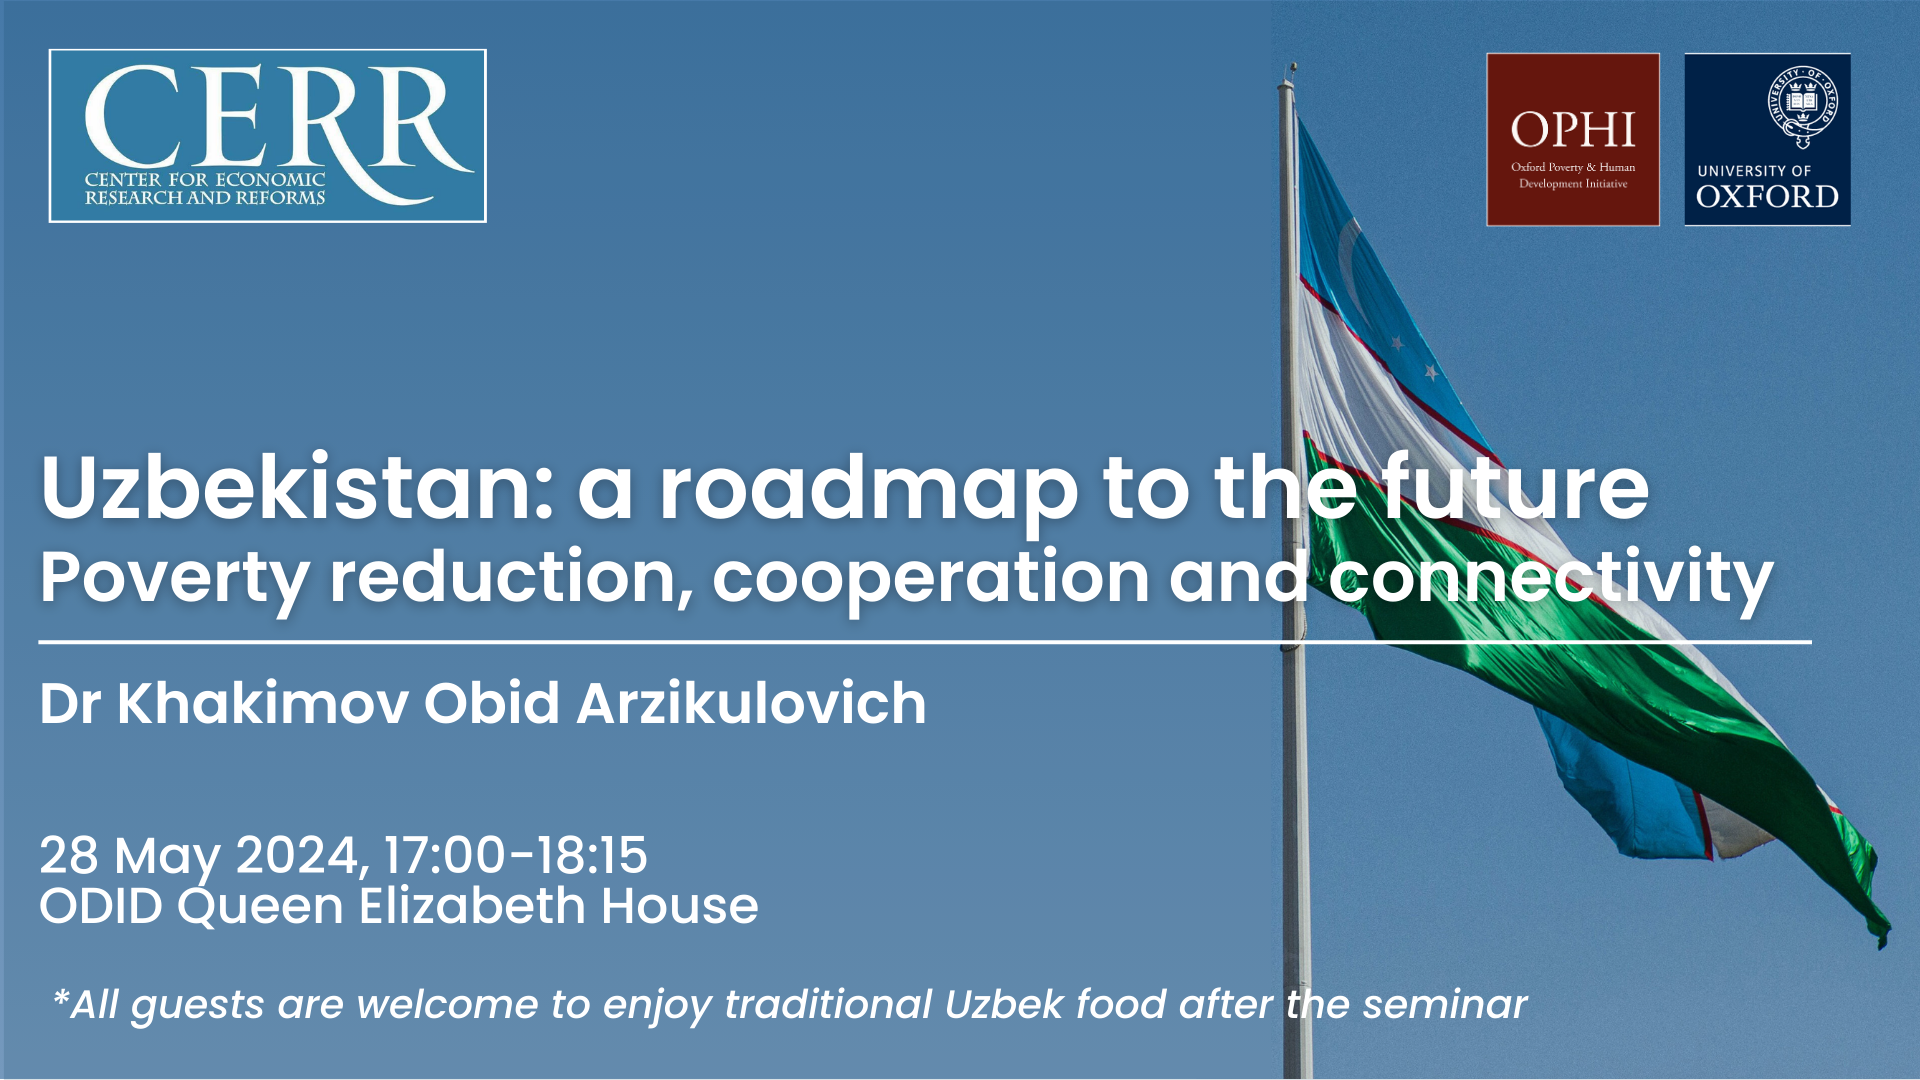 Event banner for 28 May event displaying photo of Uzbekistan's flag